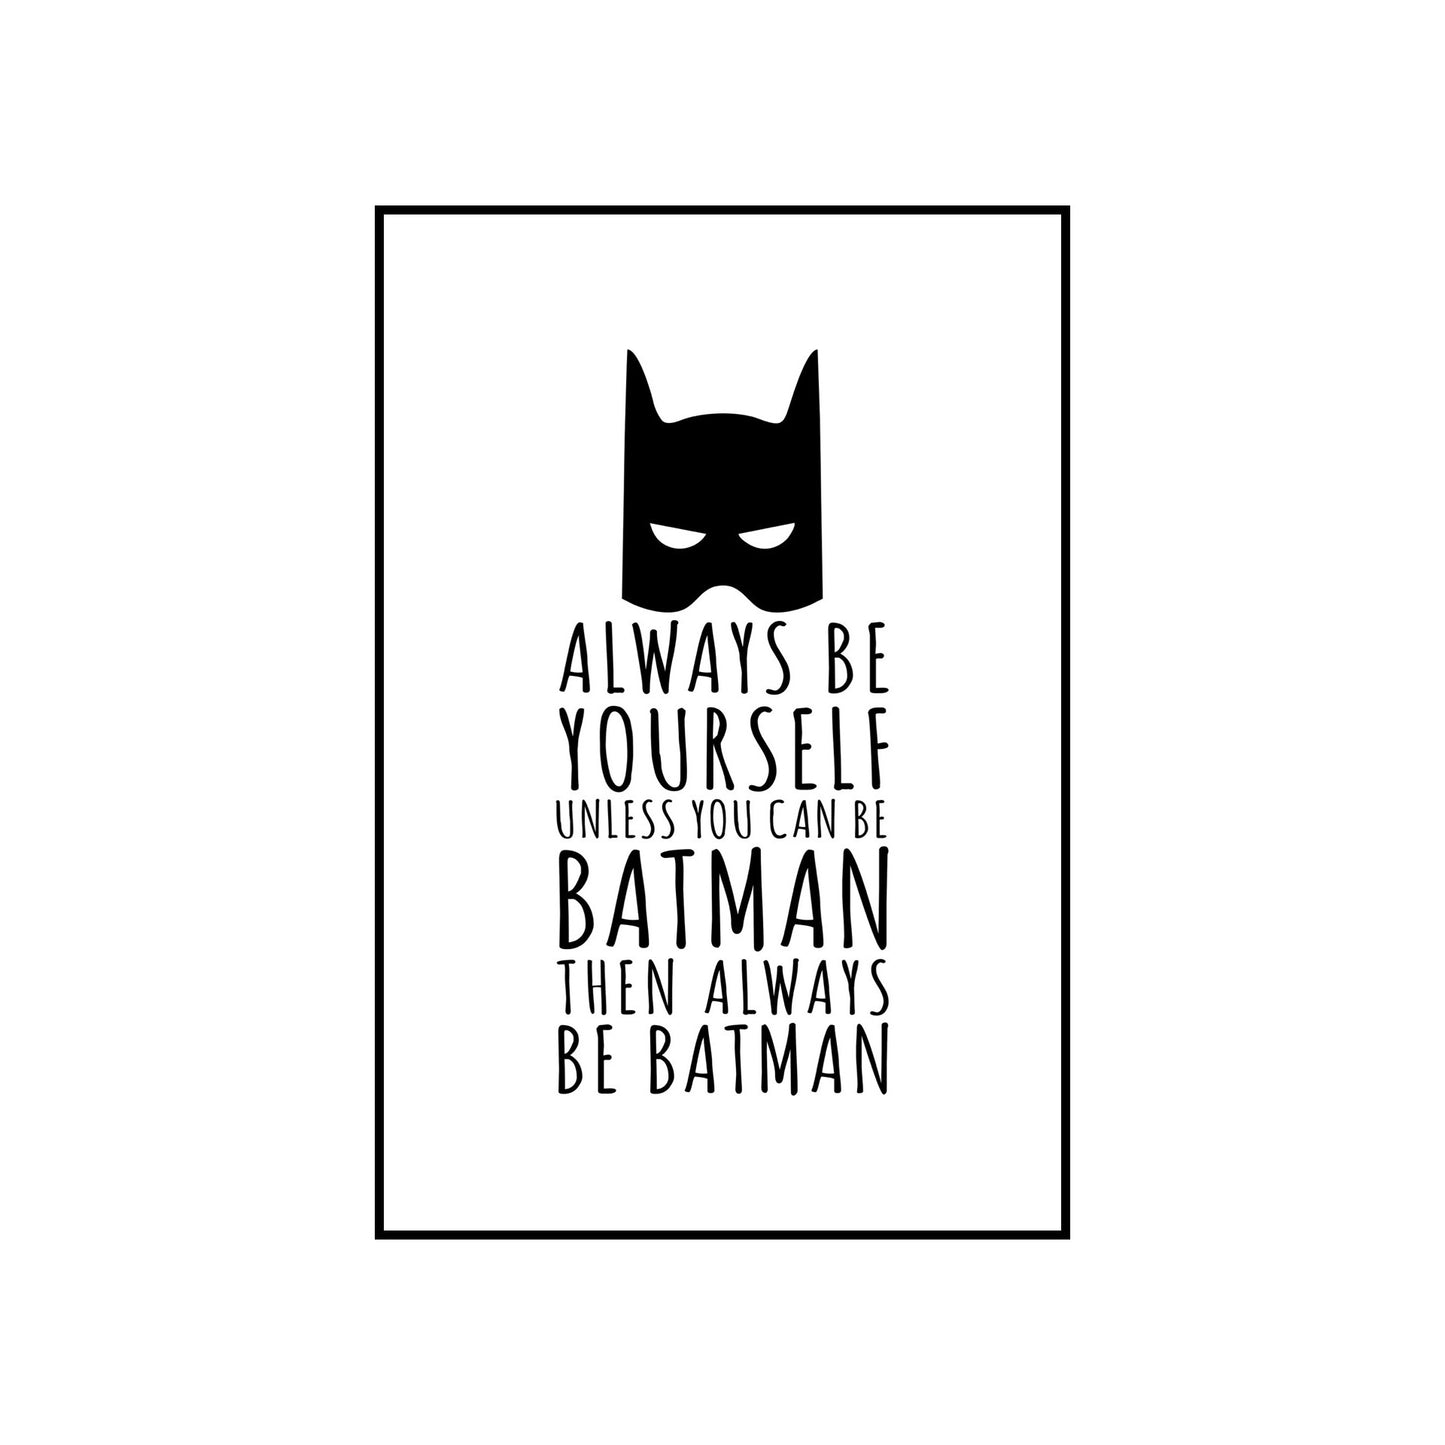 Always be yourself unless you can be Batman - THE WALL STYLIST